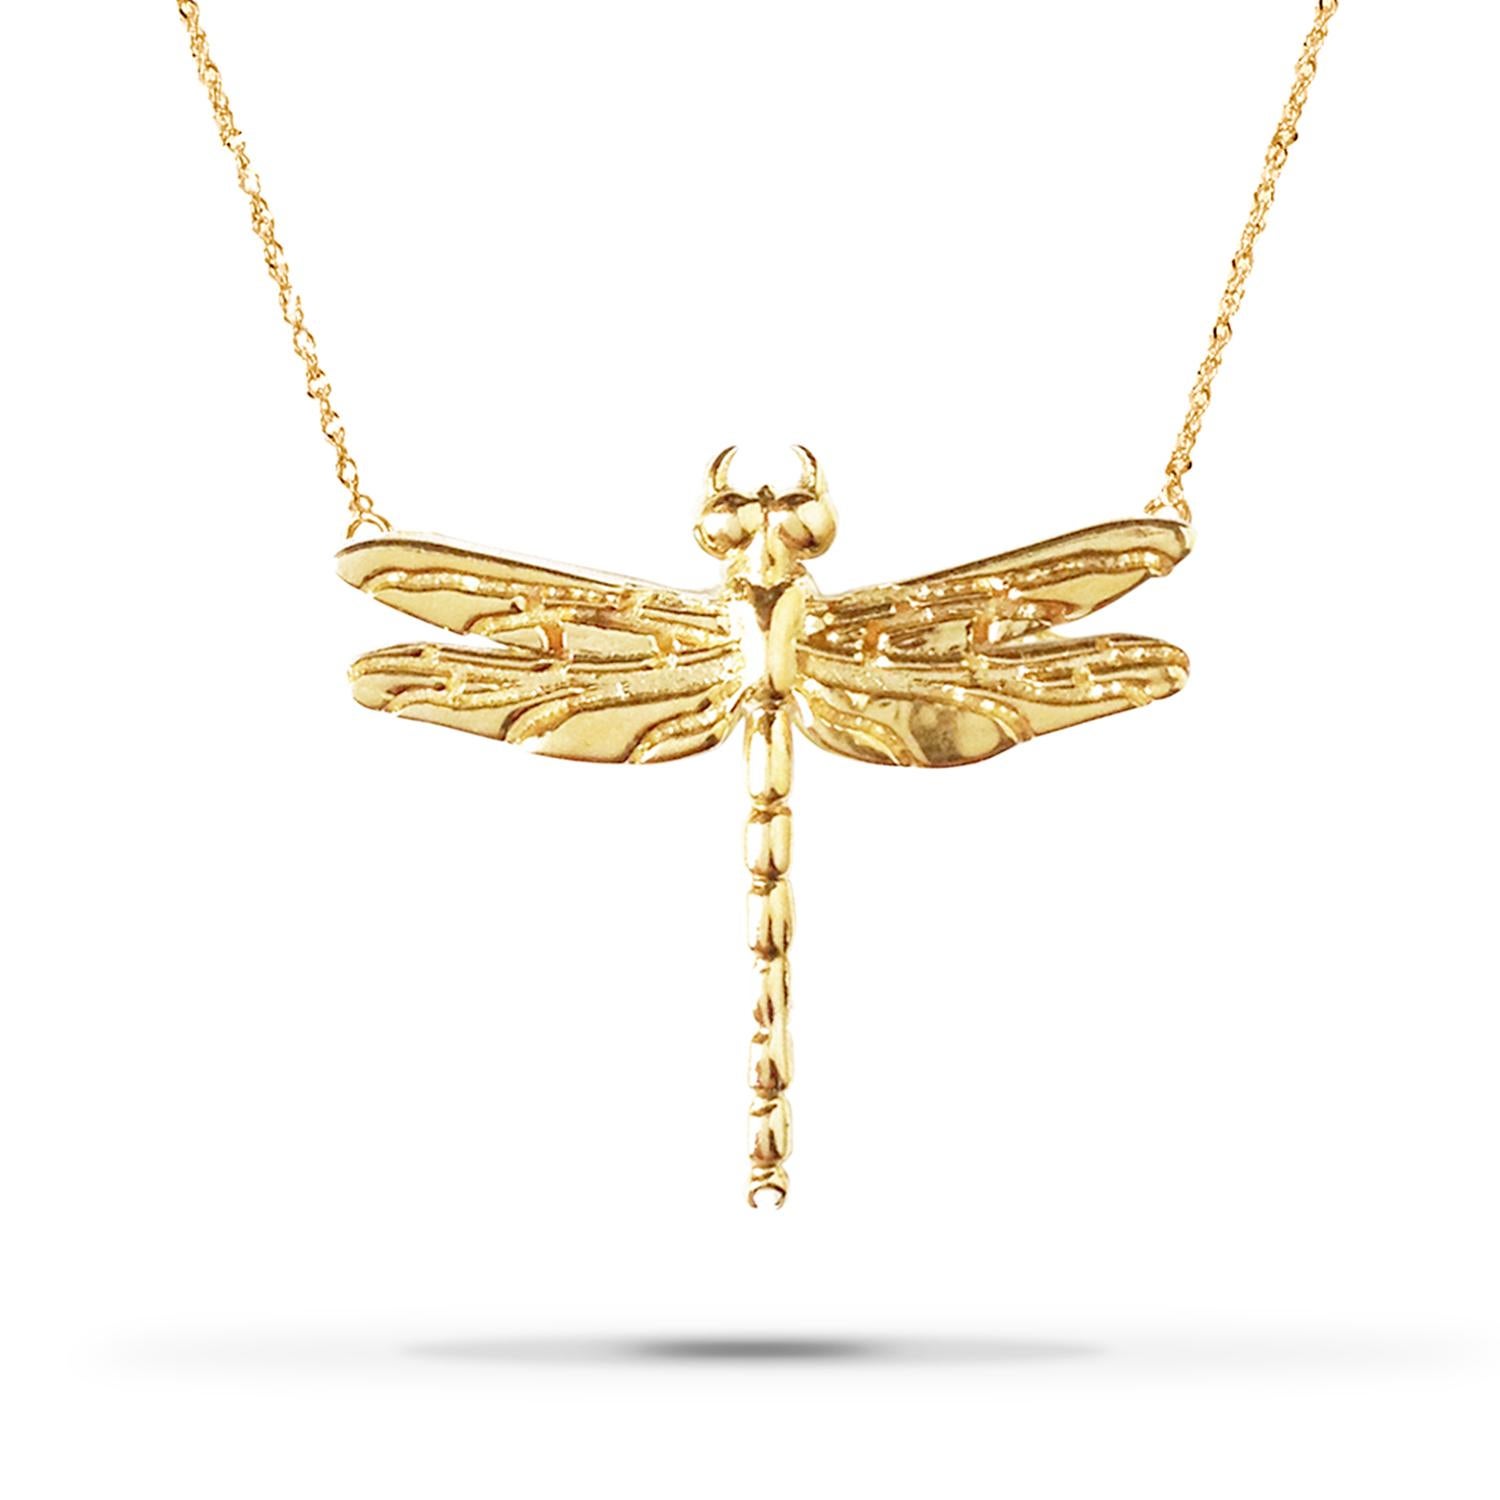 Experience the ethereal beauty of our Small Dragonfly Necklace in Solid Gold. Symbolizing adaptability and the radiance of light, dragonflies captivate with their otherworldly allure.

Crafted with precision, this necklace showcases a stunning